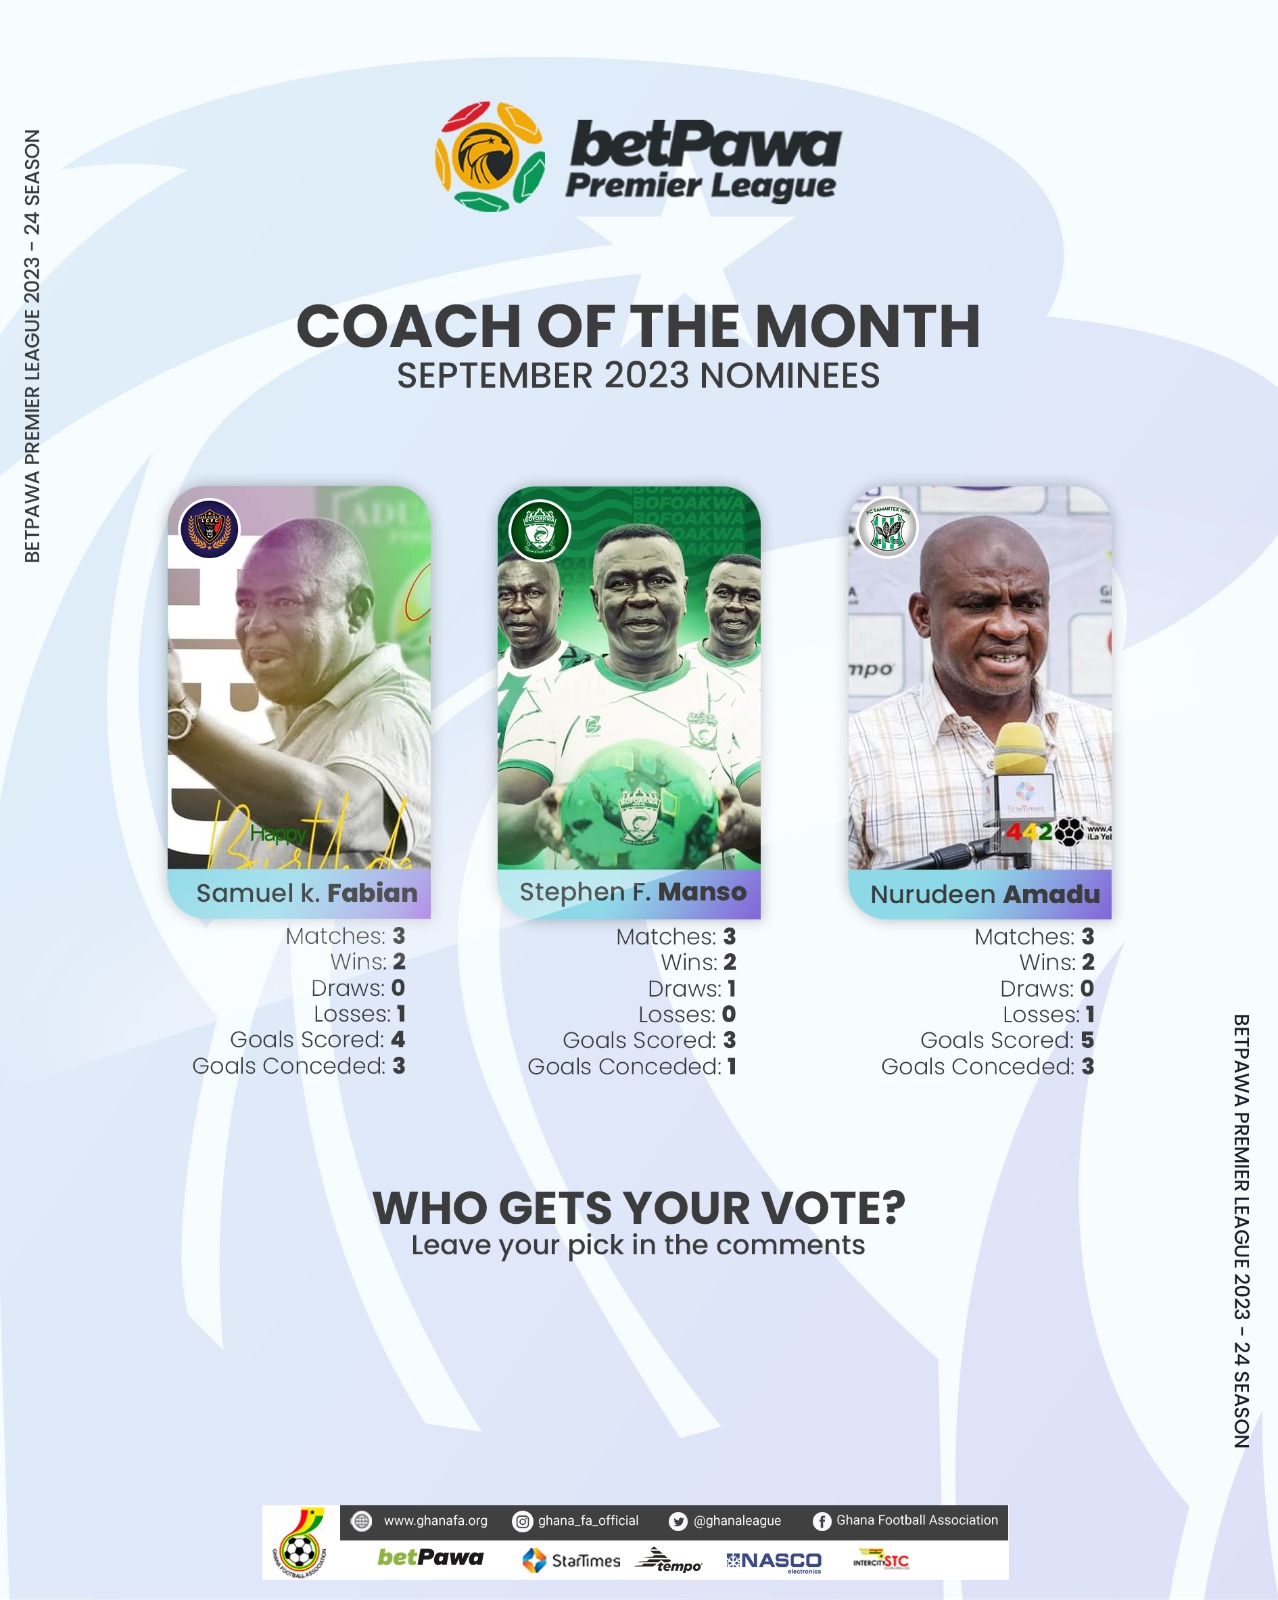 Fabin, Amadu & Frimpong Manso nominated for Coach of the Month - September